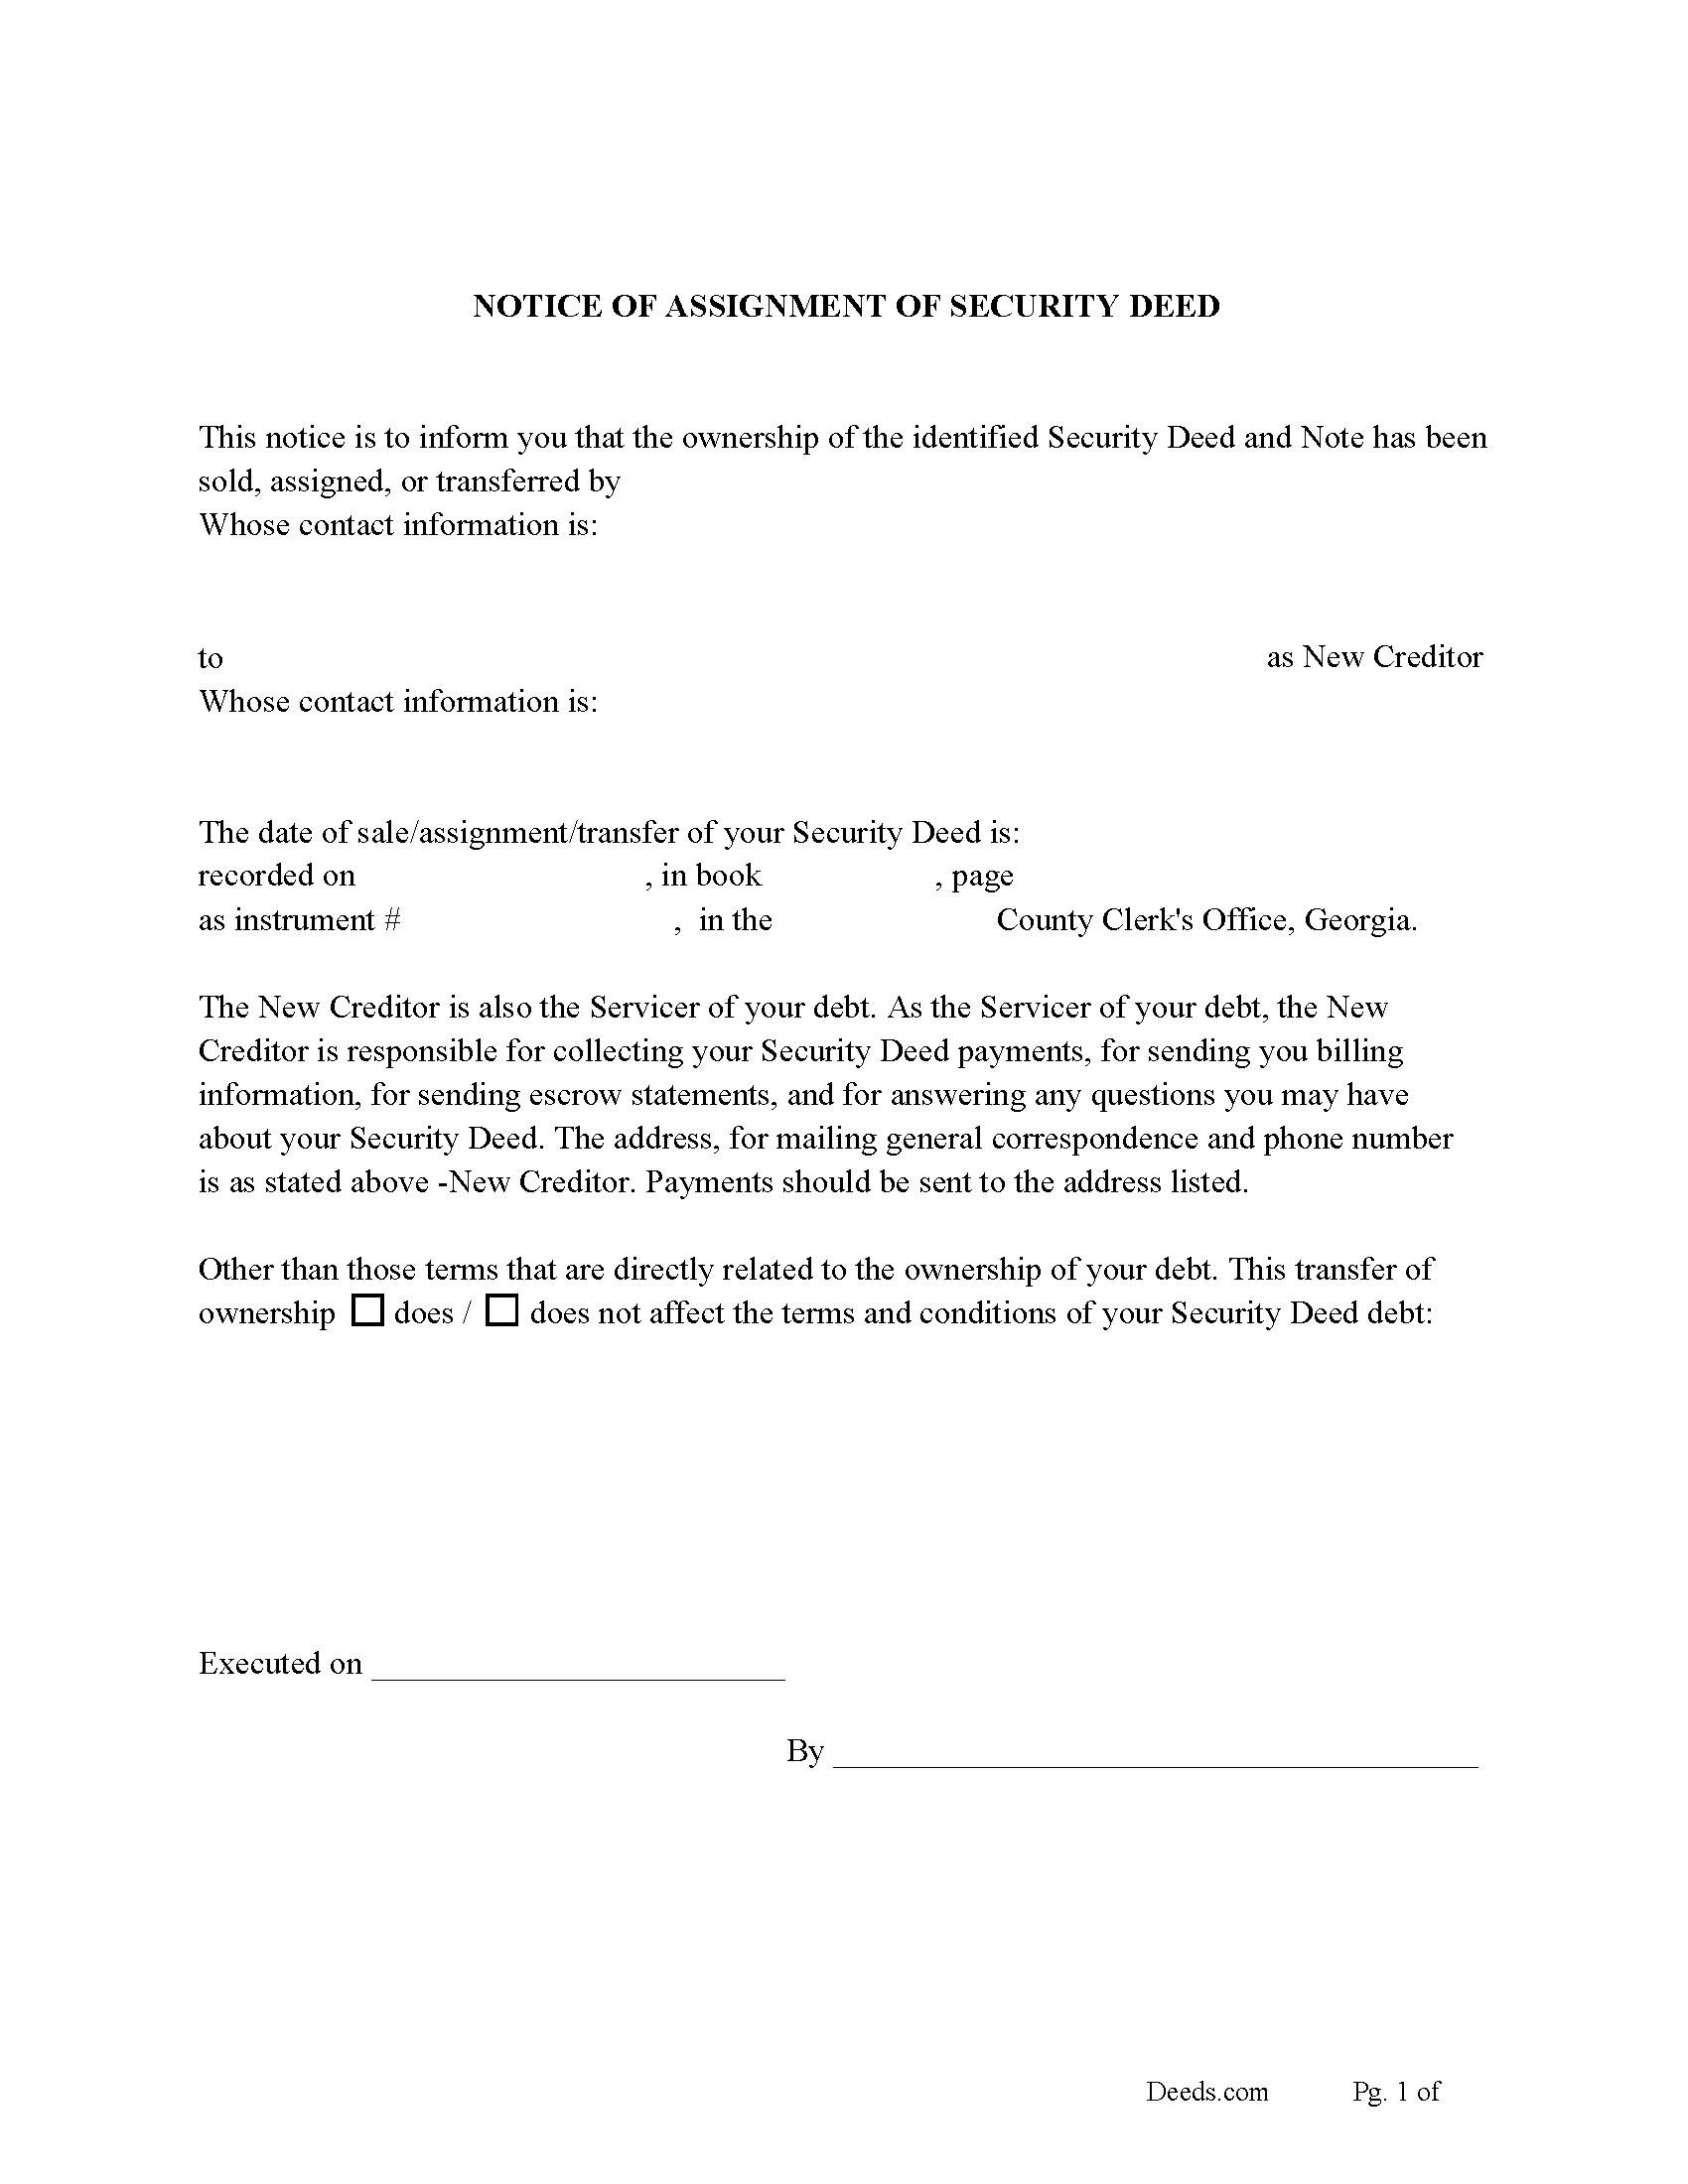 Notice of Assignment of Security Deed